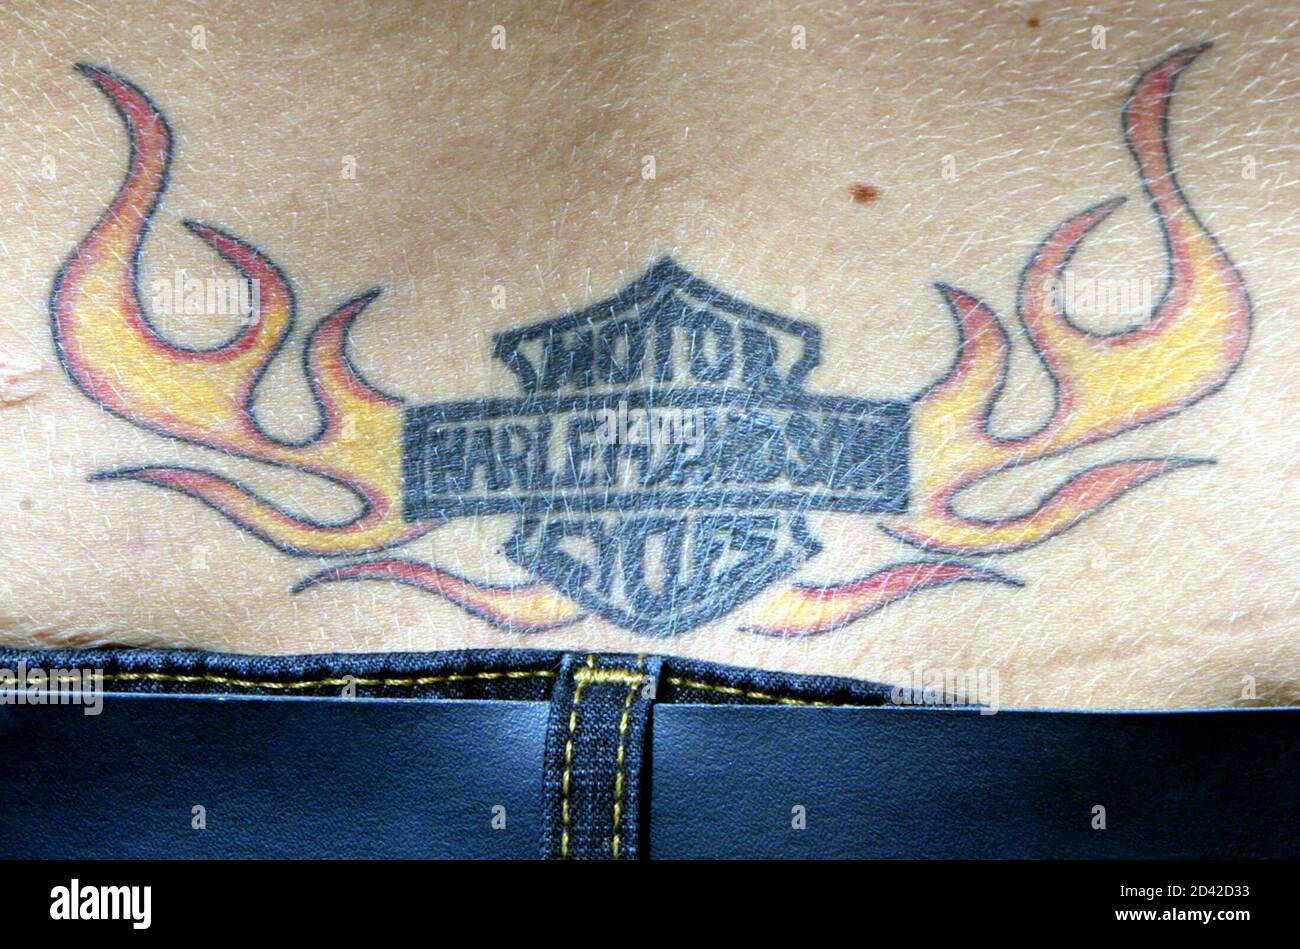 A woman shows off a tattoo on her lower back at the Harley-Davidson party in downtown Milwaukee, August 30, 2003. The legendary American motorcycle company is celebrating its 100th anniversary over four days. Stock Photo